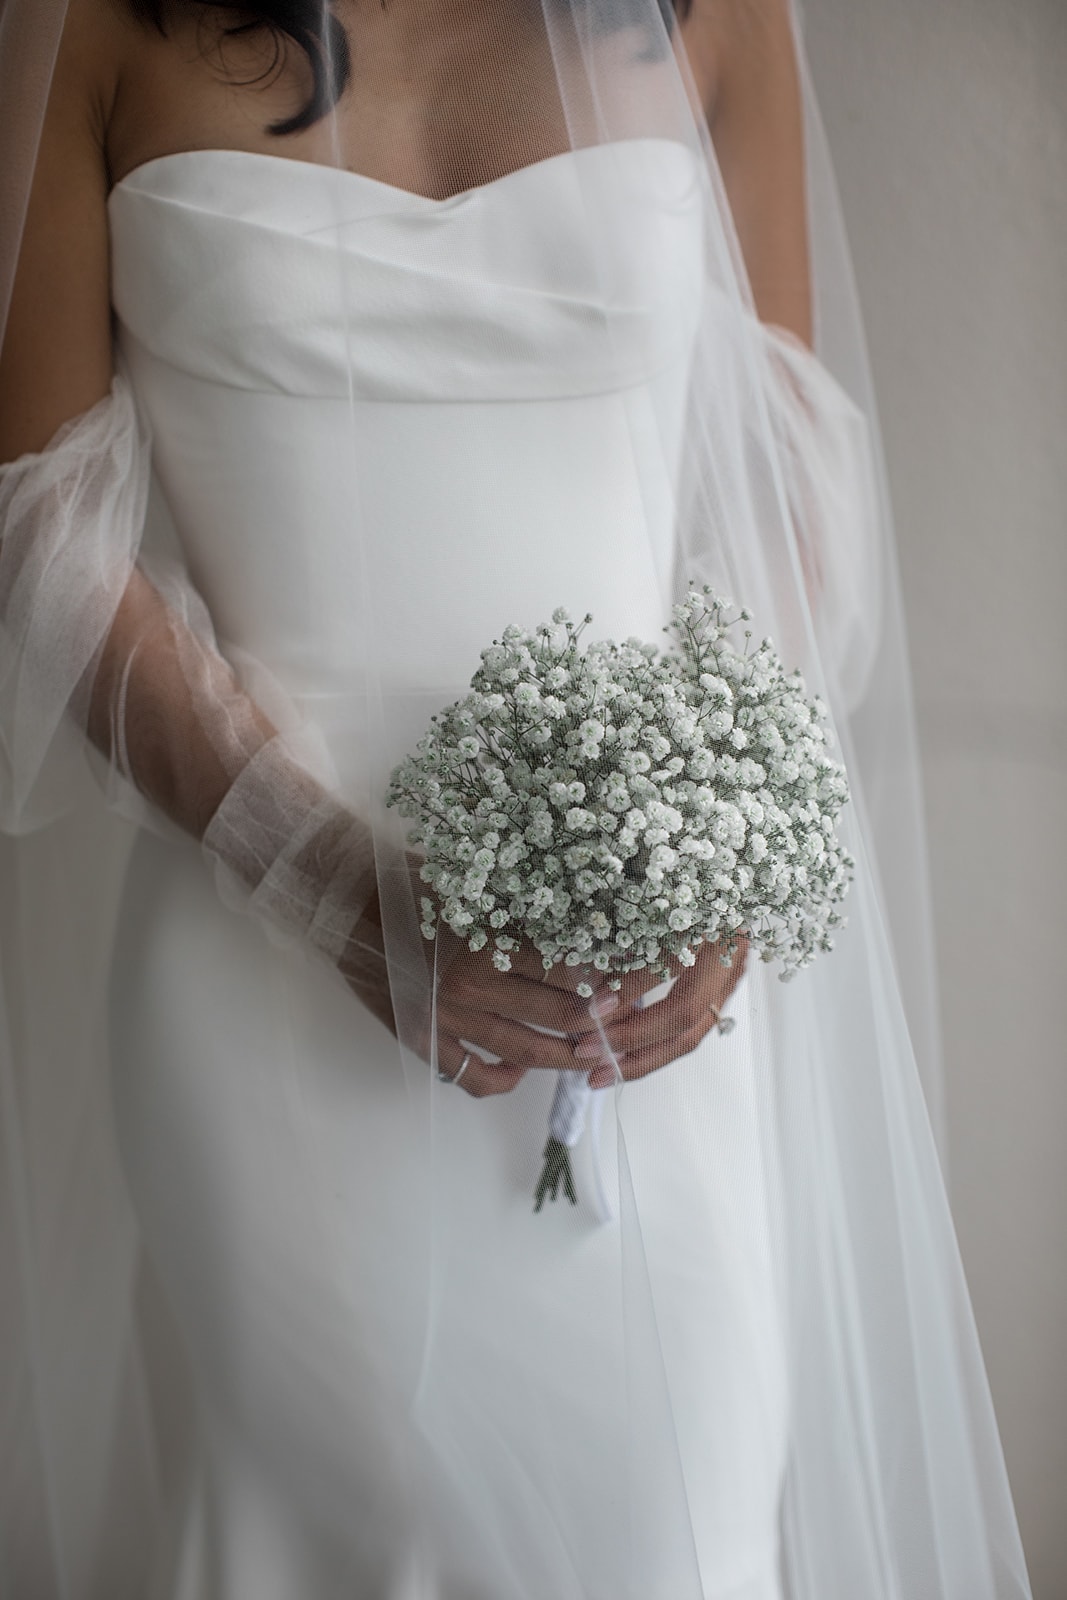 Bride holds simple wedding bouquet of baby's breath